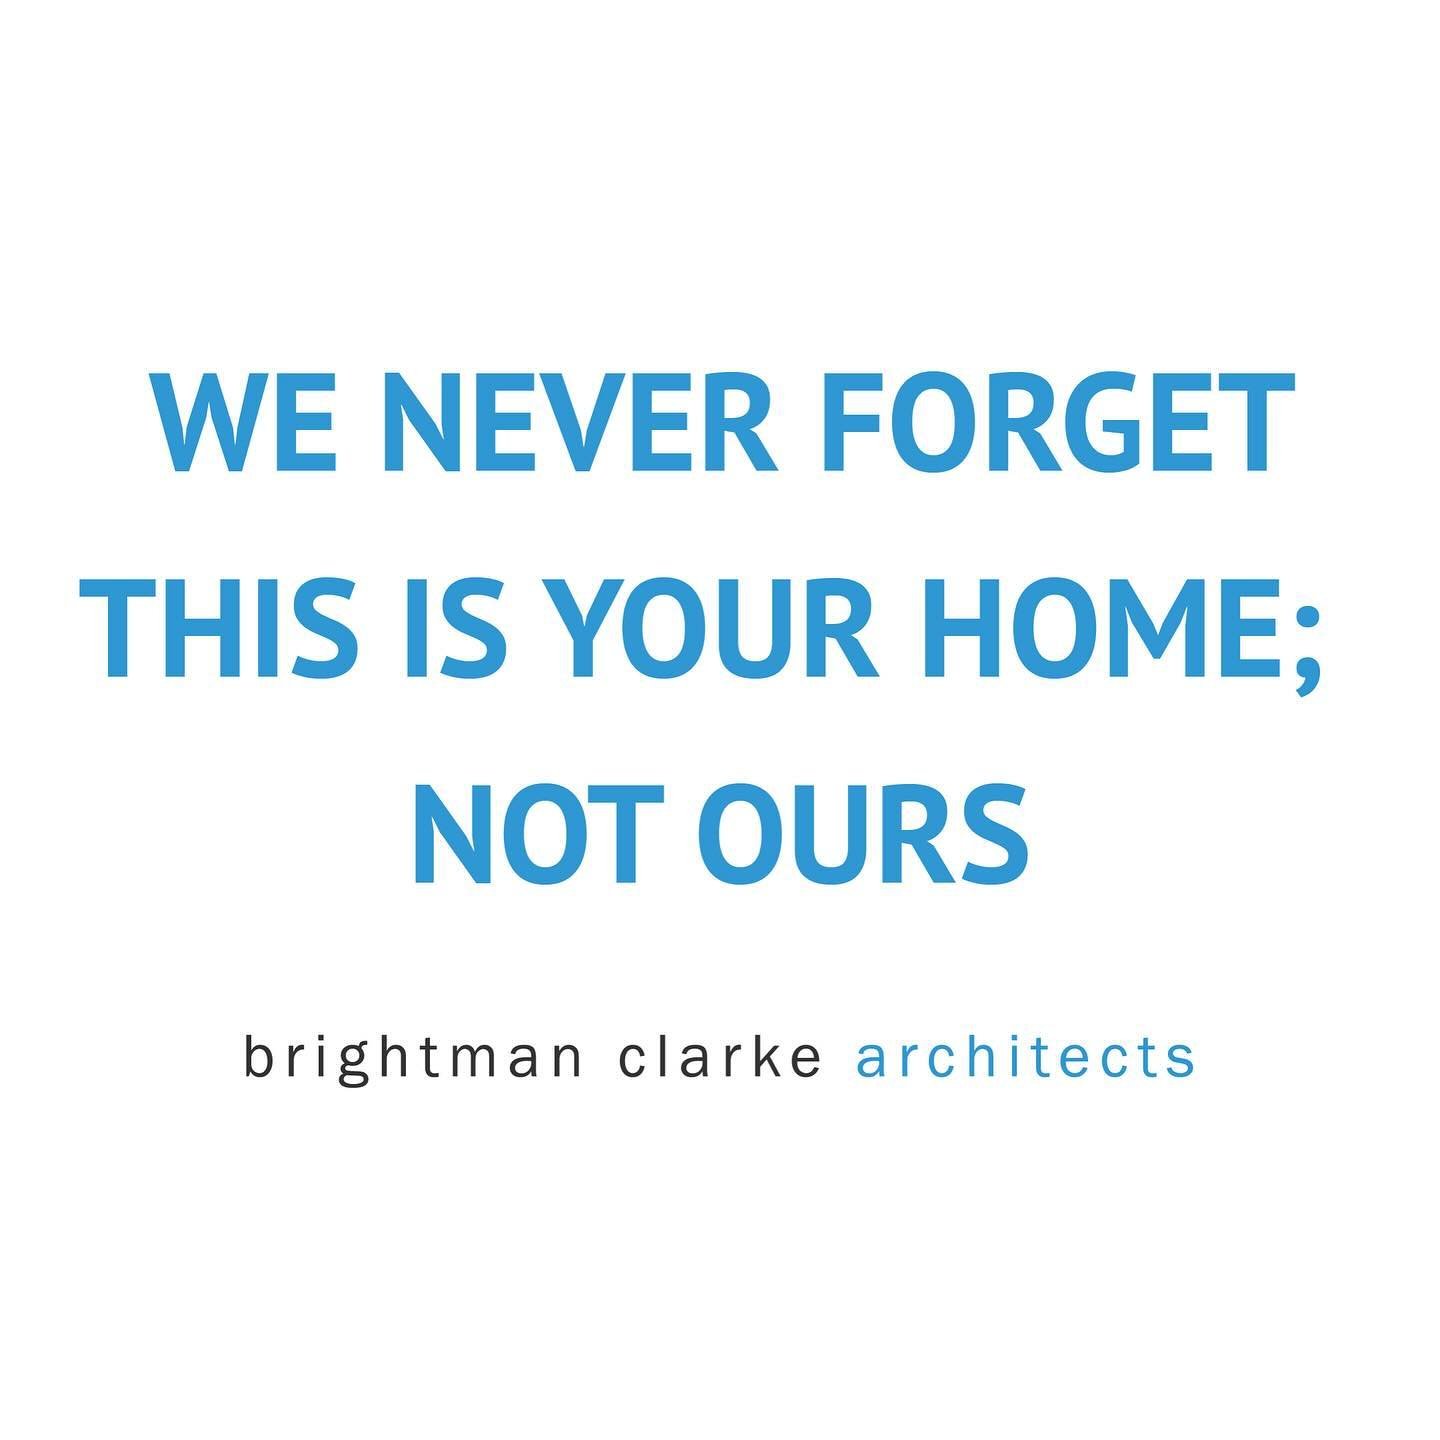 At Brightman Clarke Architects , we understand that we&rsquo;re creating *your* home, not ours. 

That&rsquo;s why we don&rsquo;t impose our style on your dreams. We collaborate closely with you to discover and enhance your unique voice, ensuring tha